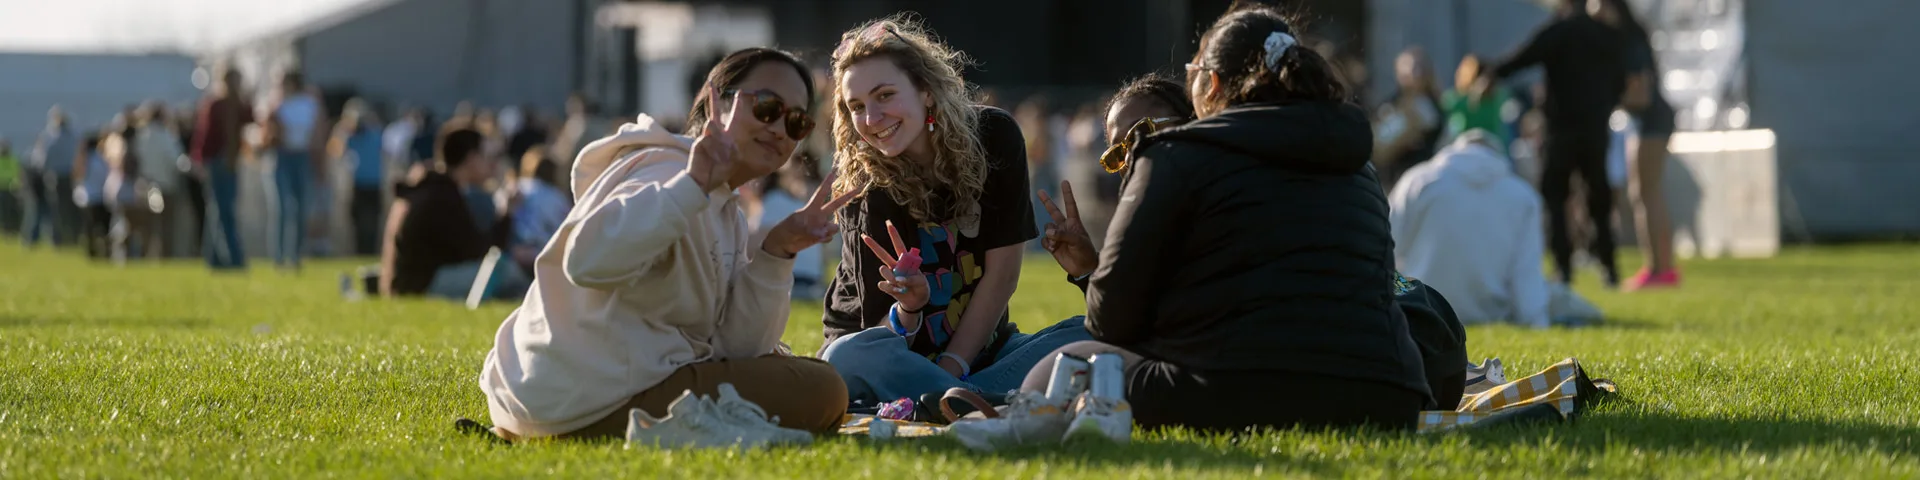 photo of students sitting in the grass using their fingers to give a "peace sign"